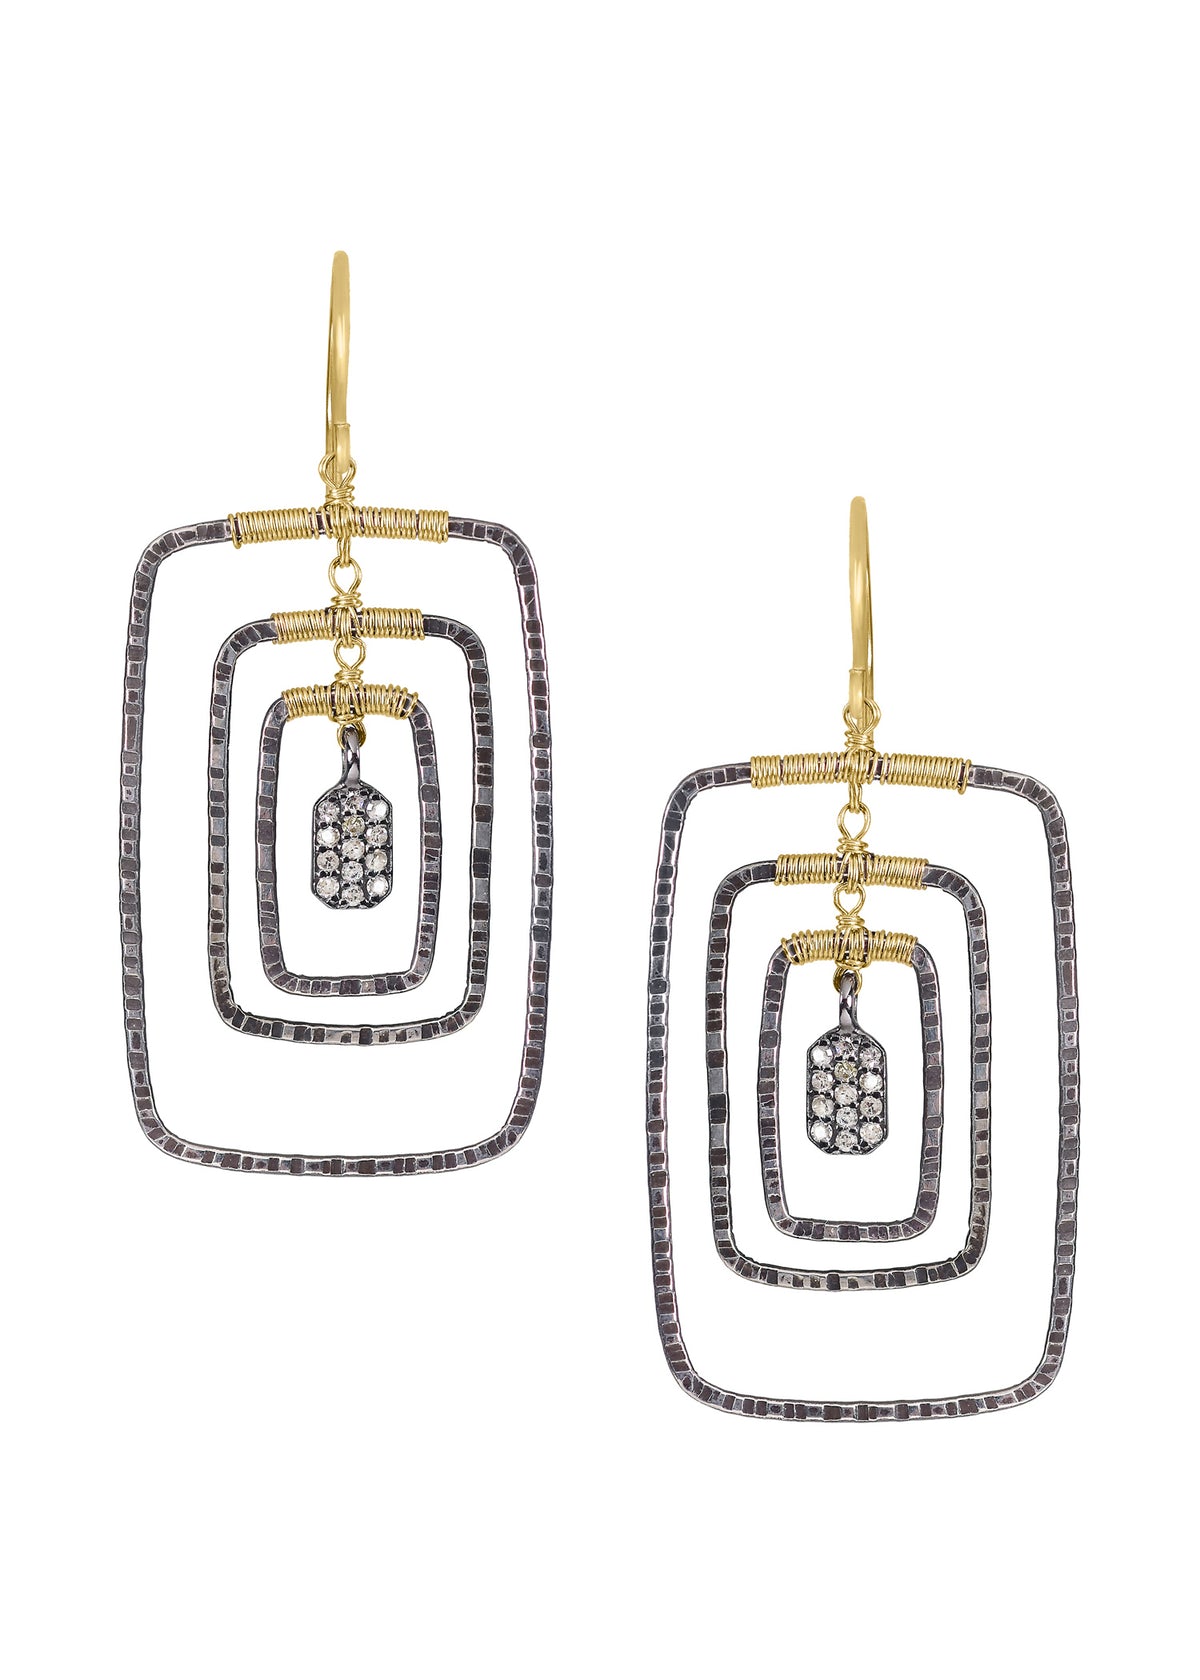 Diamond 14k gold Sterling silver Mixed metal Earrings measure 1-15/16&quot; in length (including the ear wires) and 13/16&quot; in width at the widest point Handmade in our Los Angeles studio